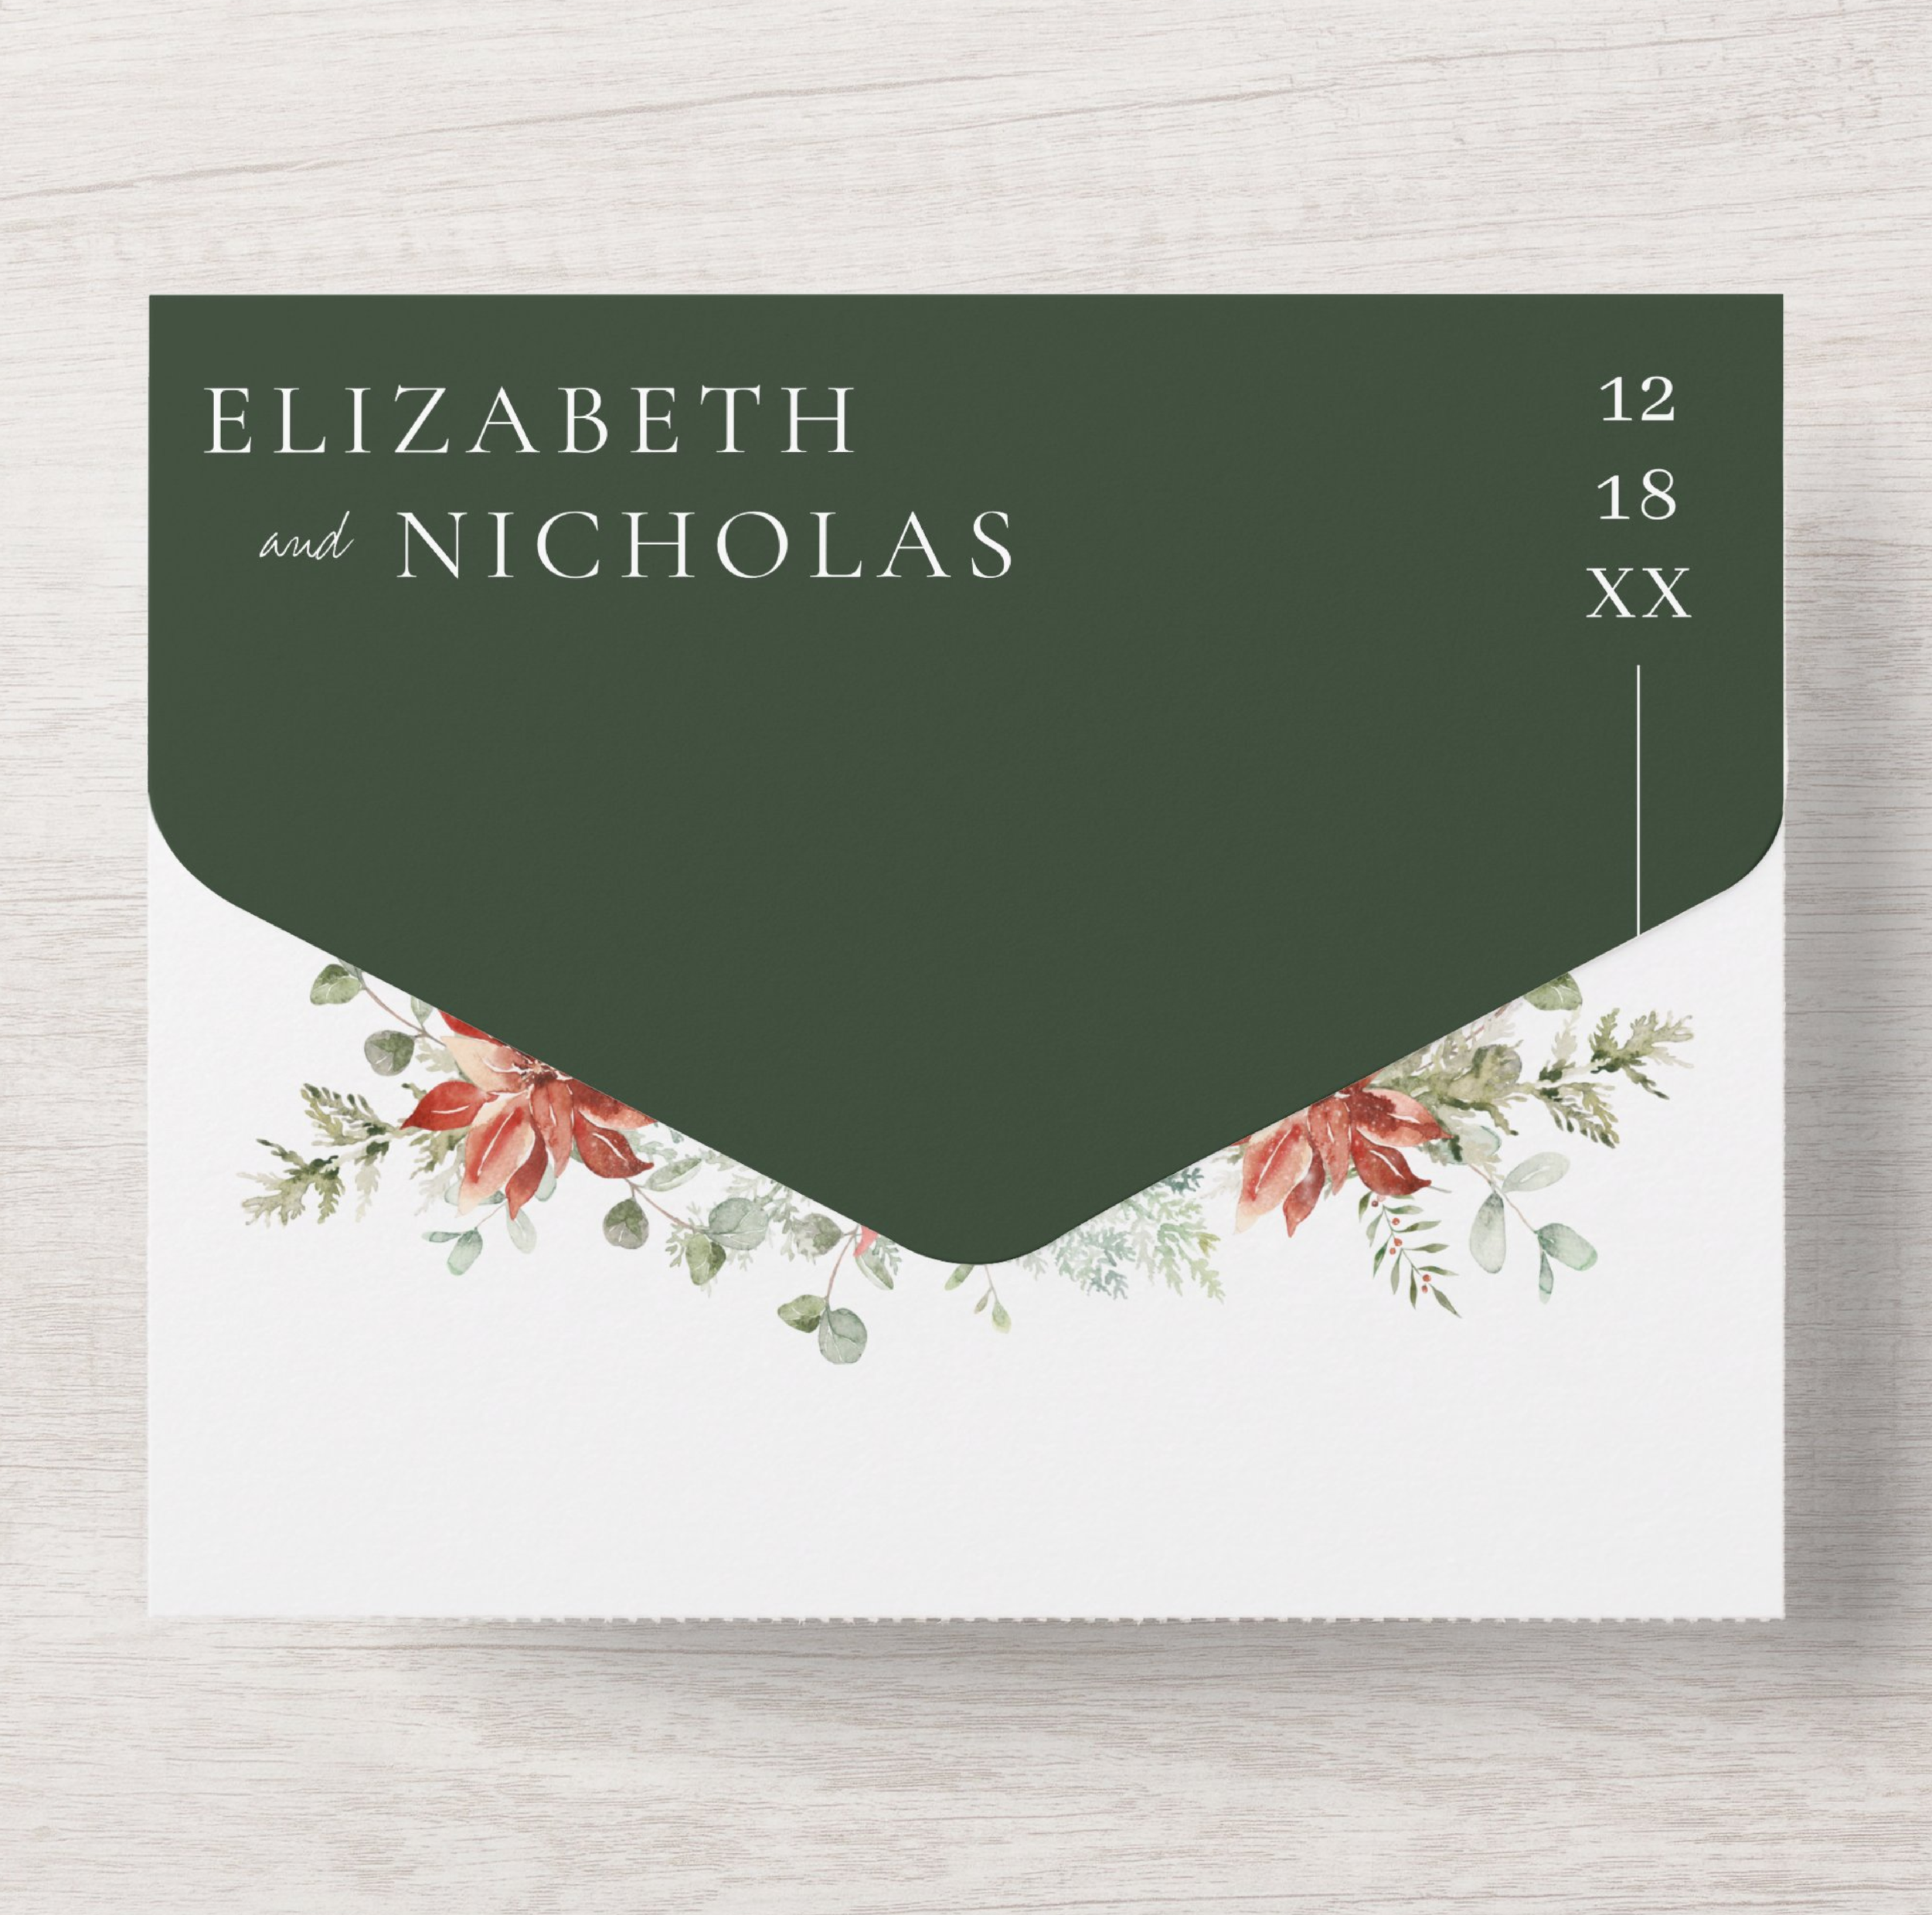 tis_the_season_christmas_wedding_floral_all_in_one_invitation-r3c447a070010465aa1bcc4a7fe497d9b_uunxn_1024.png